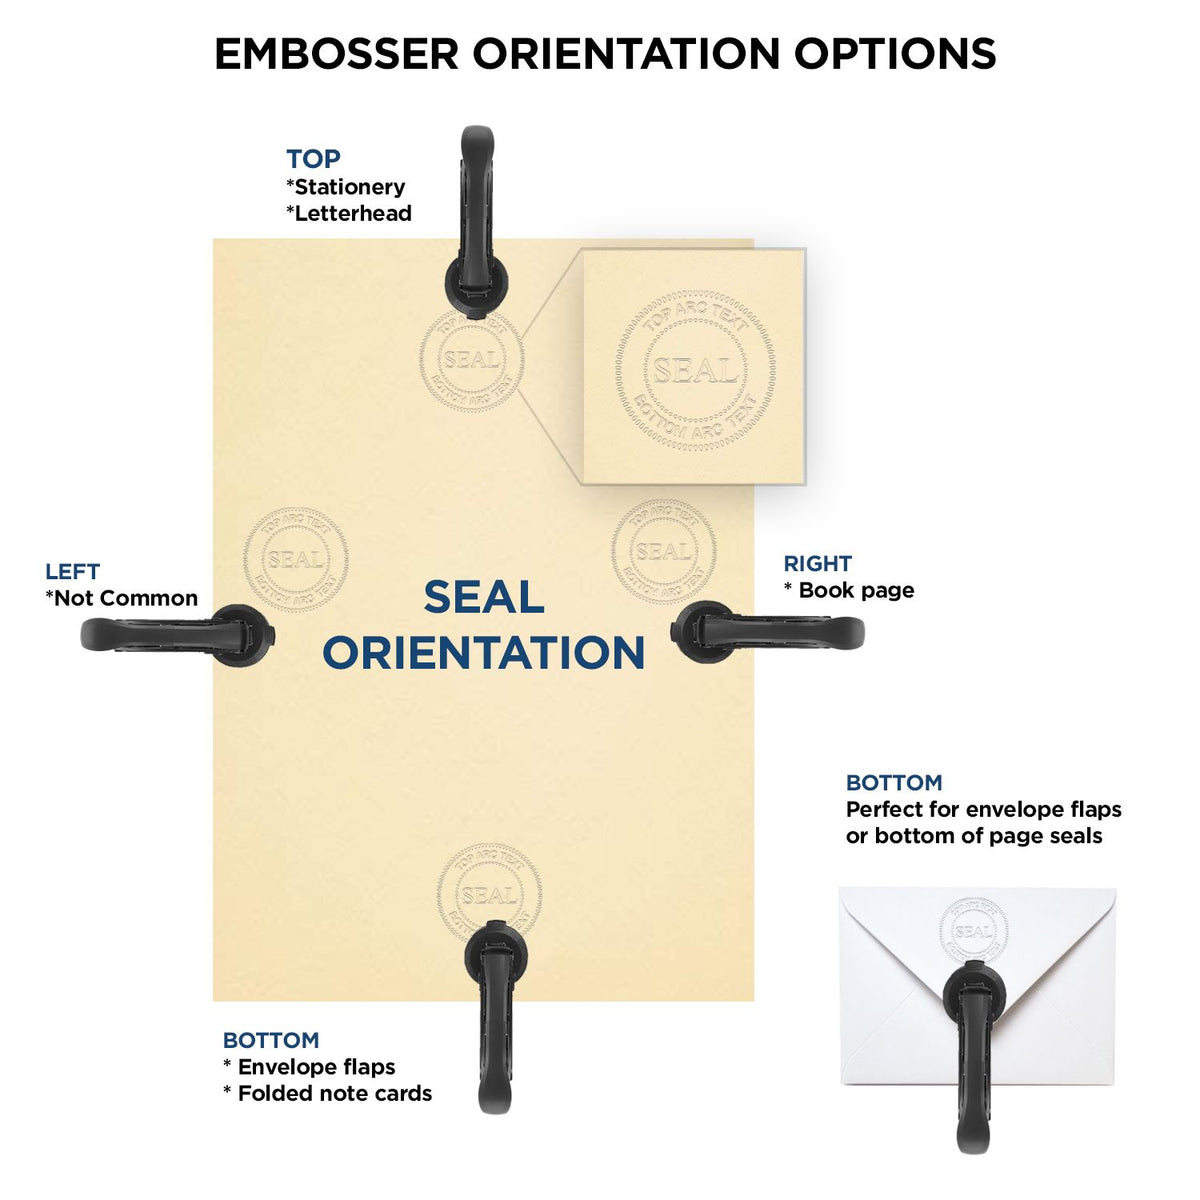 An infographic for the Handheld Delaware Land Surveyor Seal showing embosser orientation, this is showing examples of a top, bottom, right and left insert.